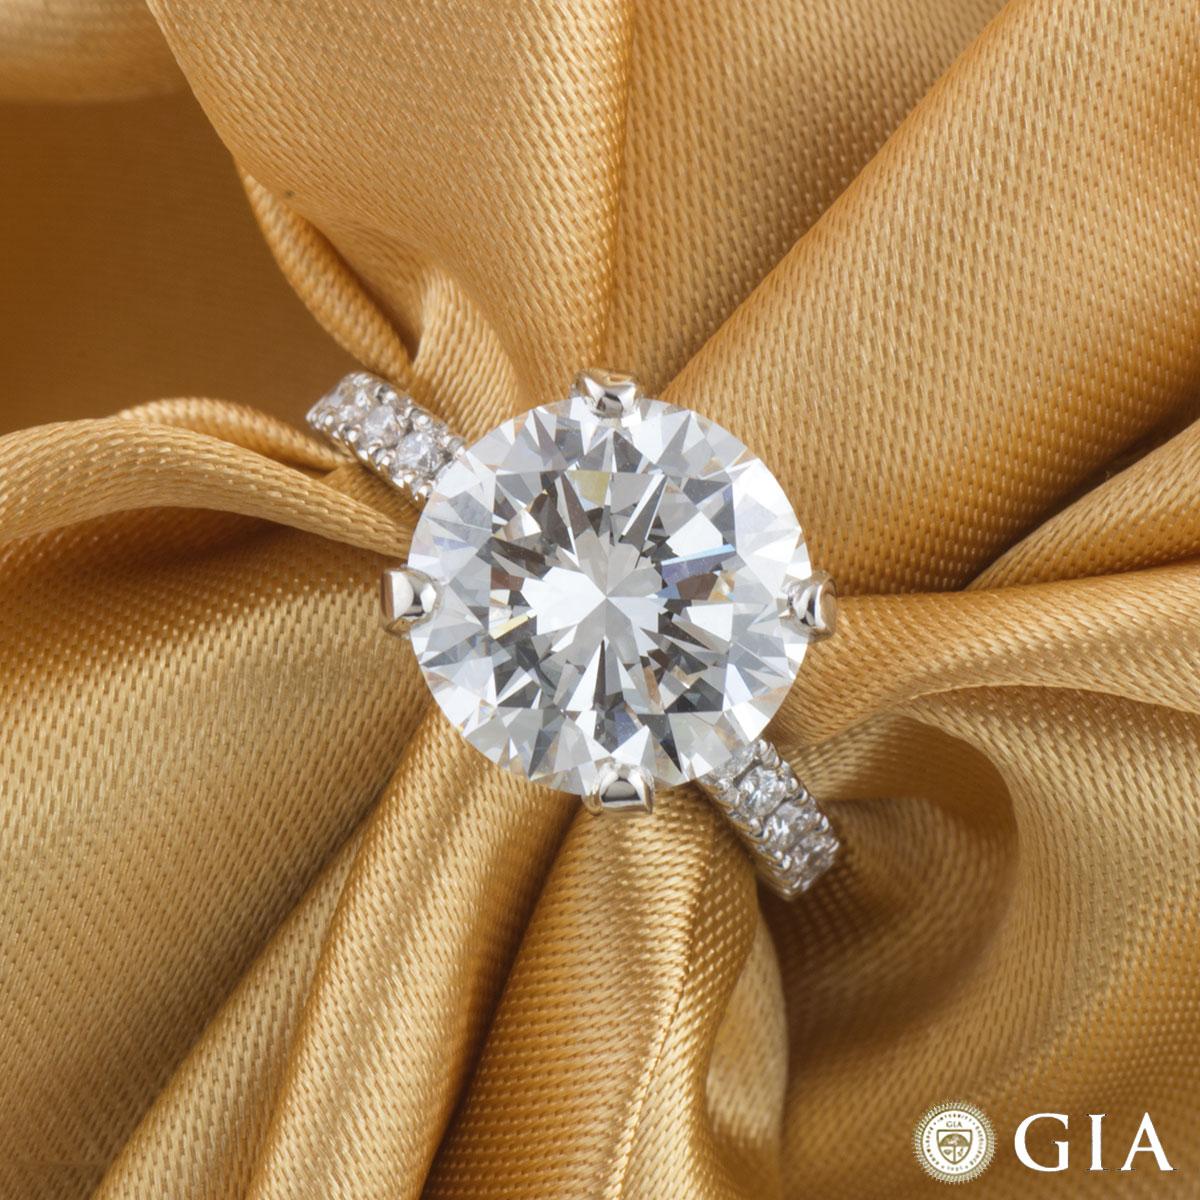 A stunning platinum diamond engagement ring. The ring comprises of a round brilliant cut diamond in a 4 claw setting with a weight of 5.02ct, H colour and VVS2 clarity. Complementing the centre stone are diamond set shoulders with a total weight of